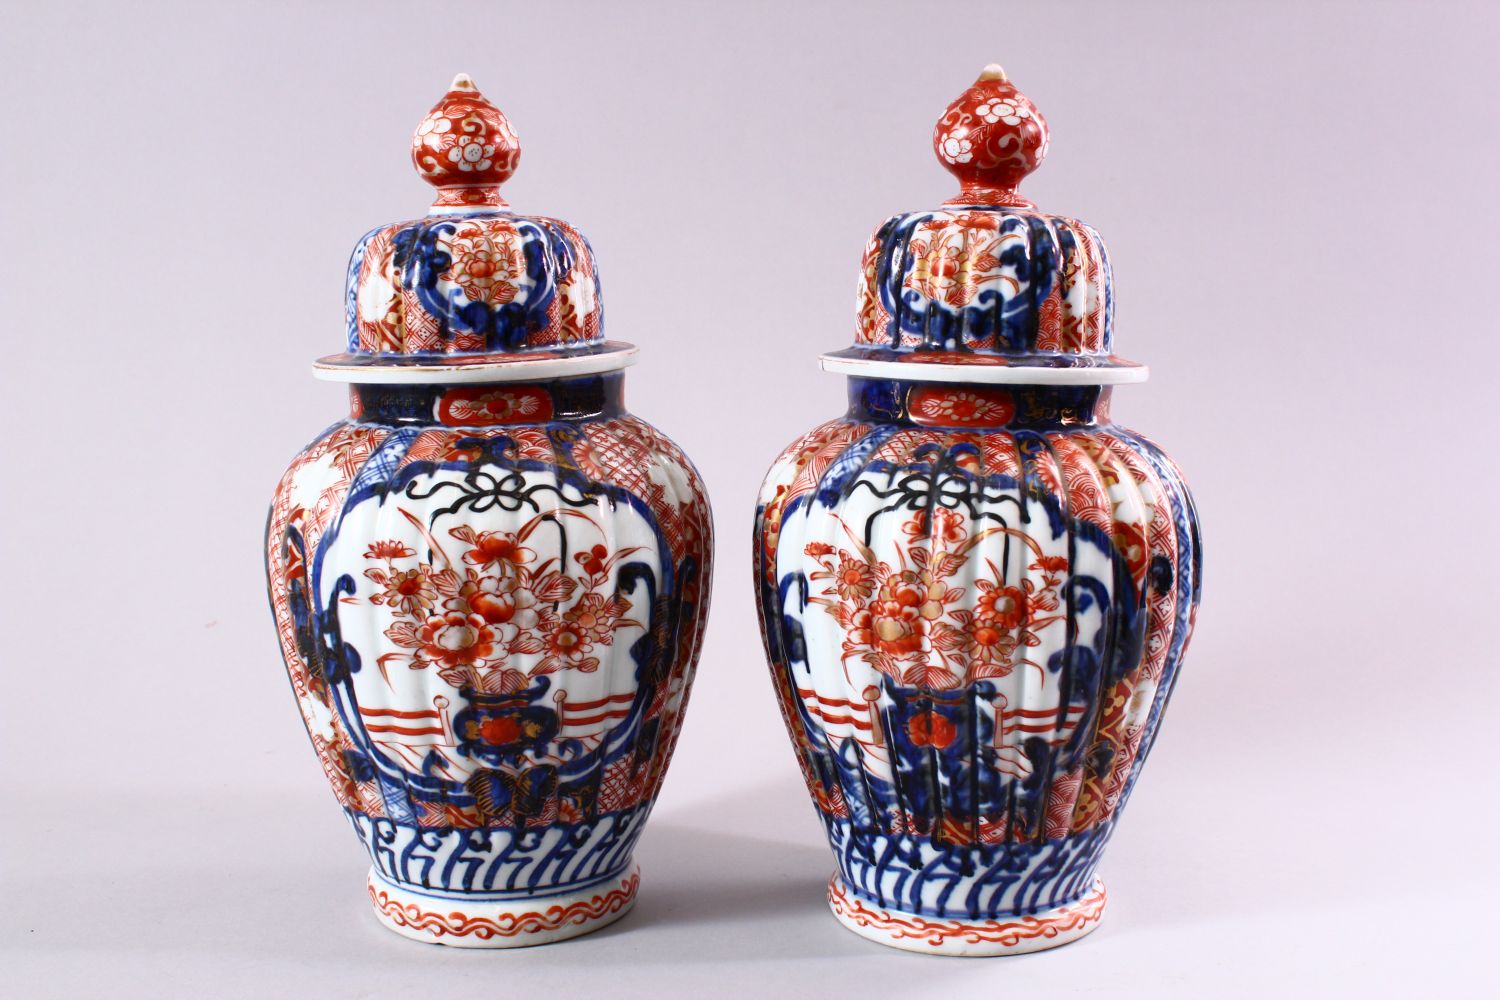 A PAIR OF JAPANESE MEIJI PERIOD IMARI PORCELAIN VASES & COVERS, with panel decoration depicting - Image 3 of 6